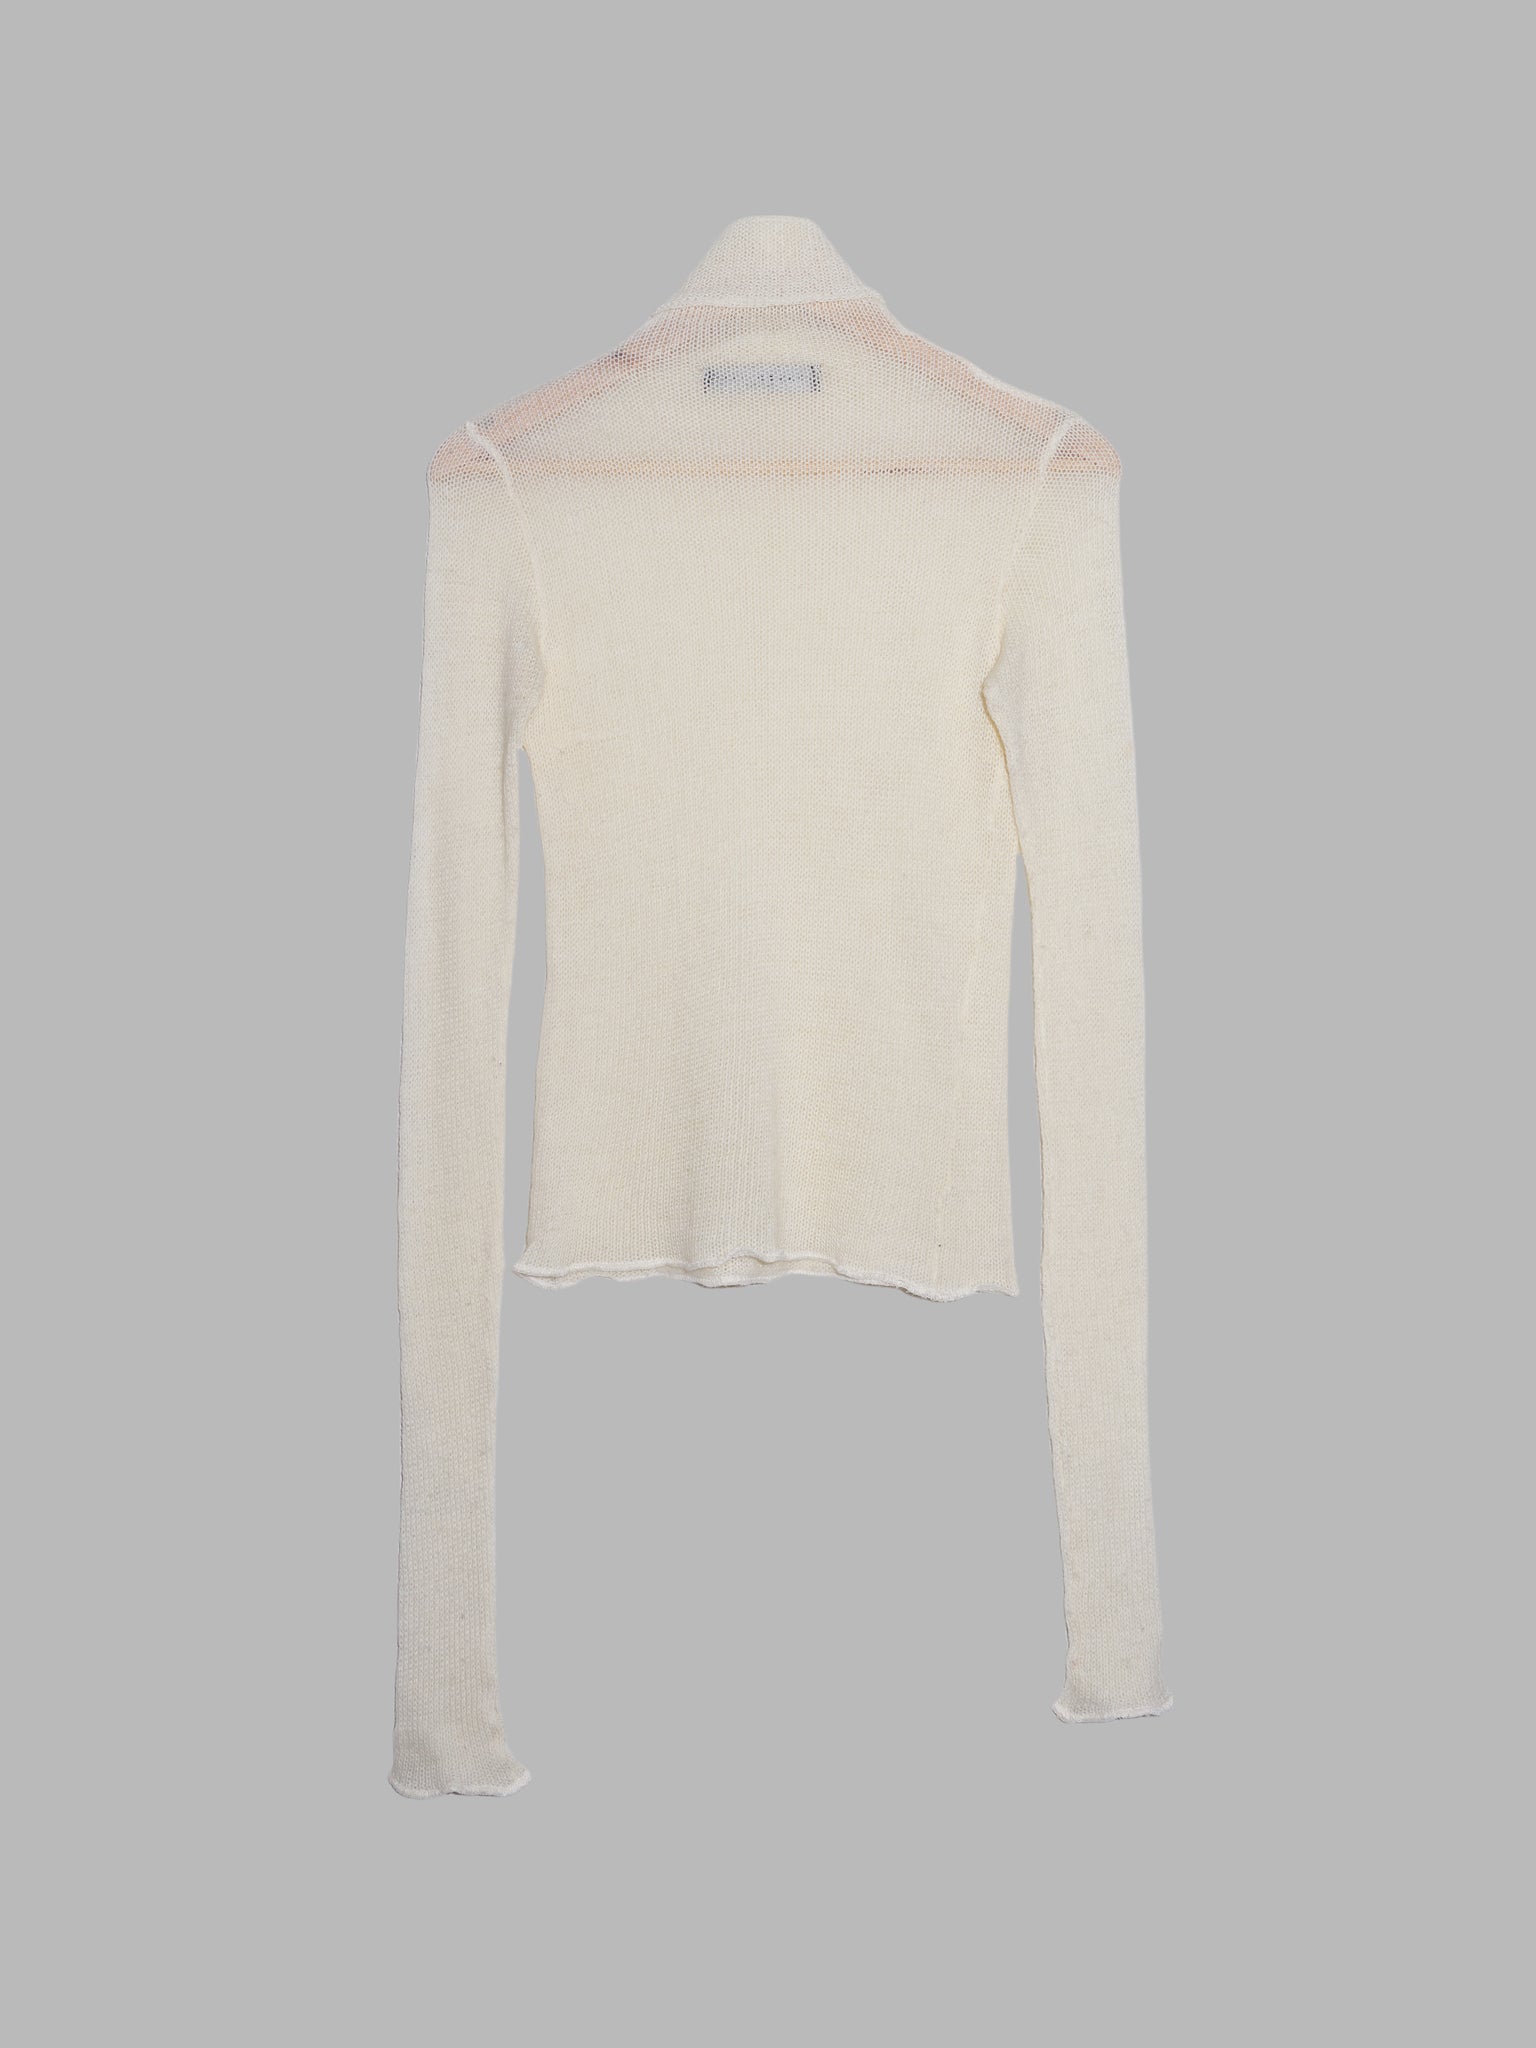 Jean Colonna cream loose knit turtleneck with extra long sleeves